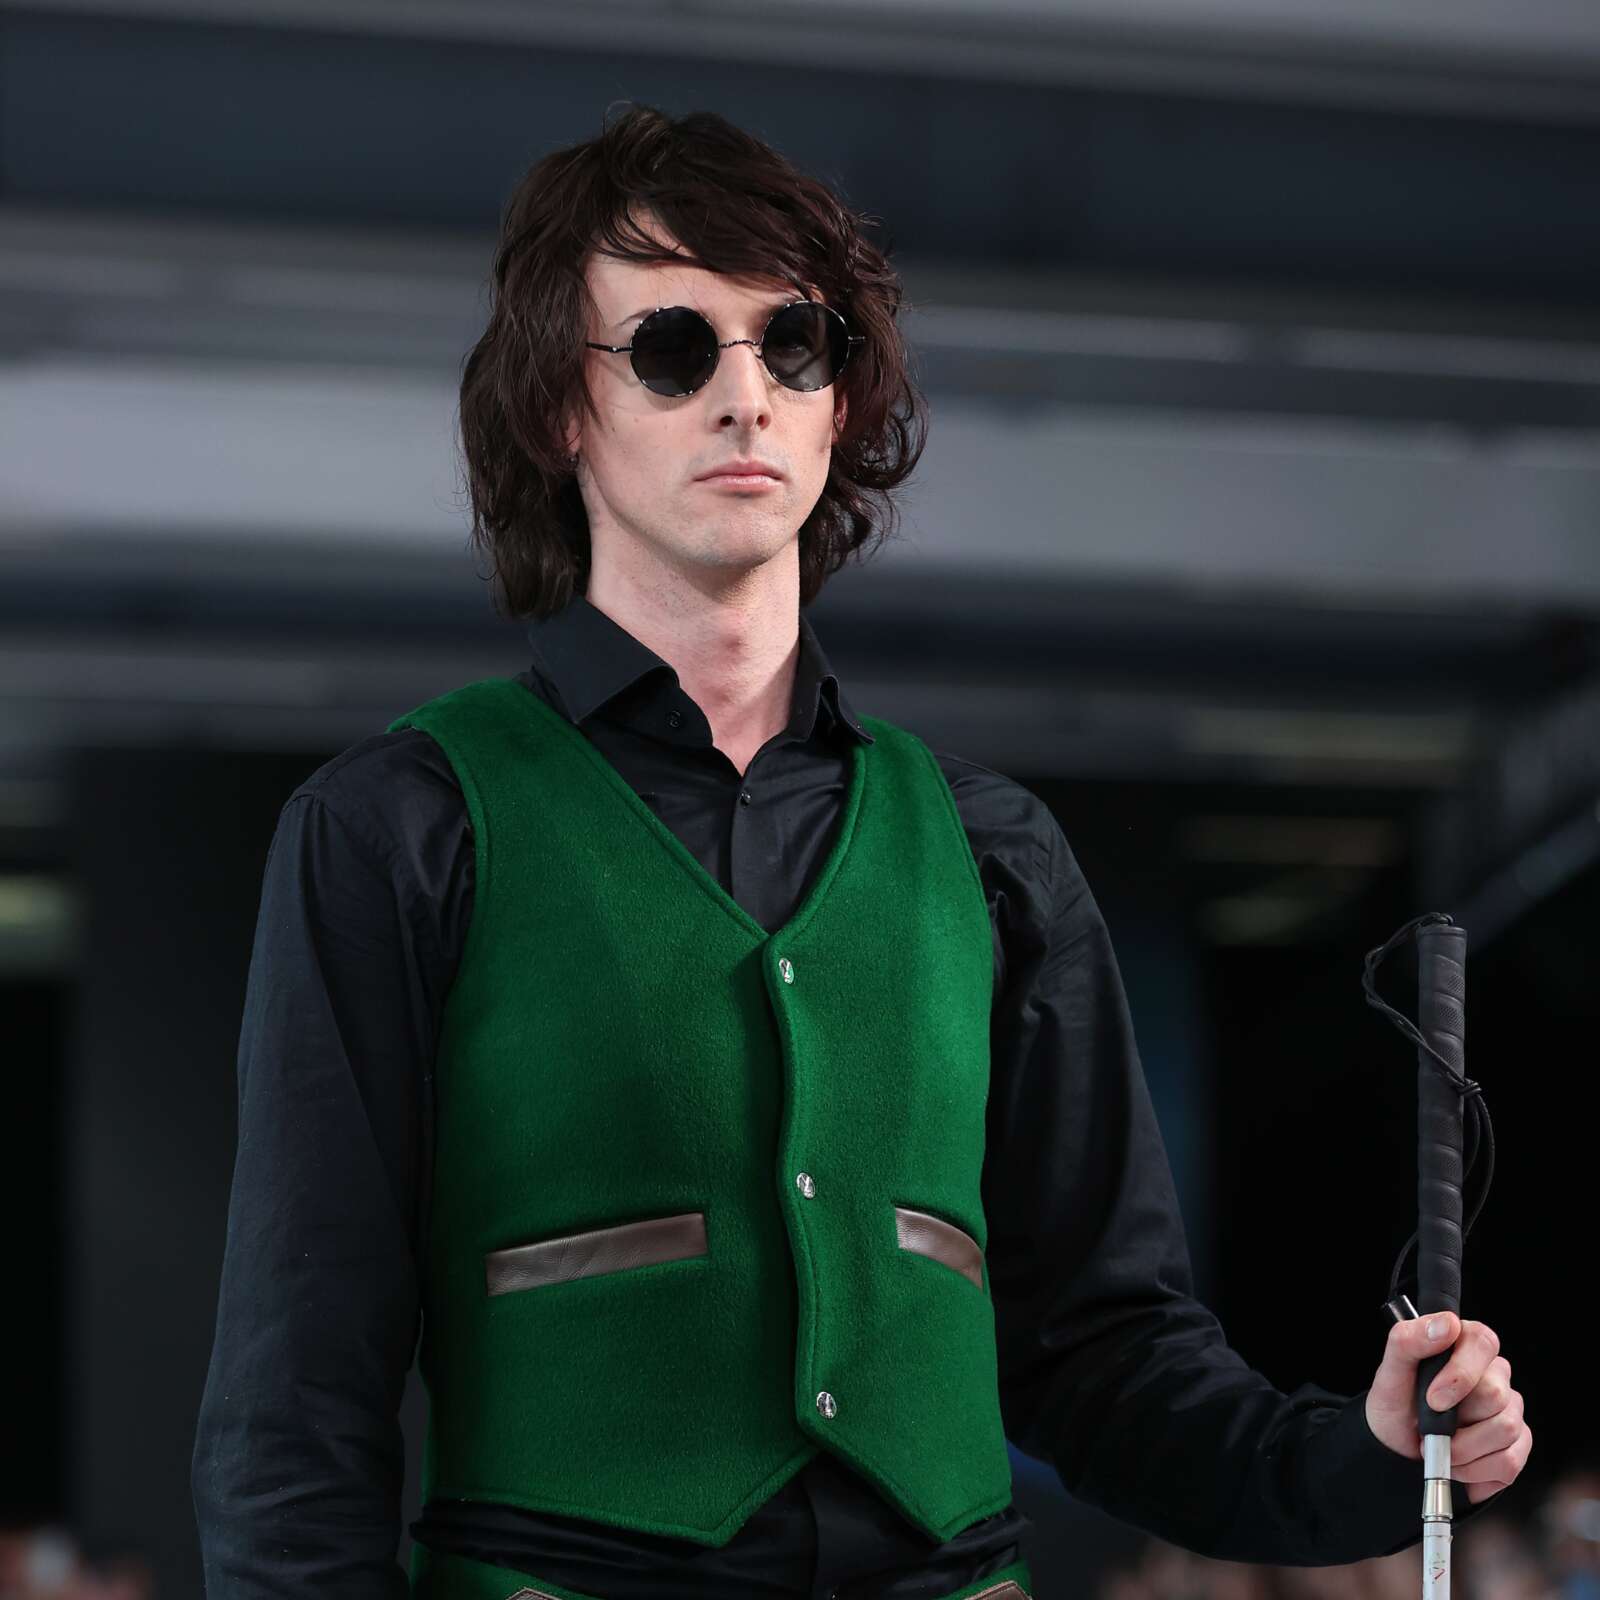 Ari is a fair-skinned male with long brunette wavy hair. He is wearing black circular glasses and a black long-sleeve shirt with a green vest. He is walking with a cane.